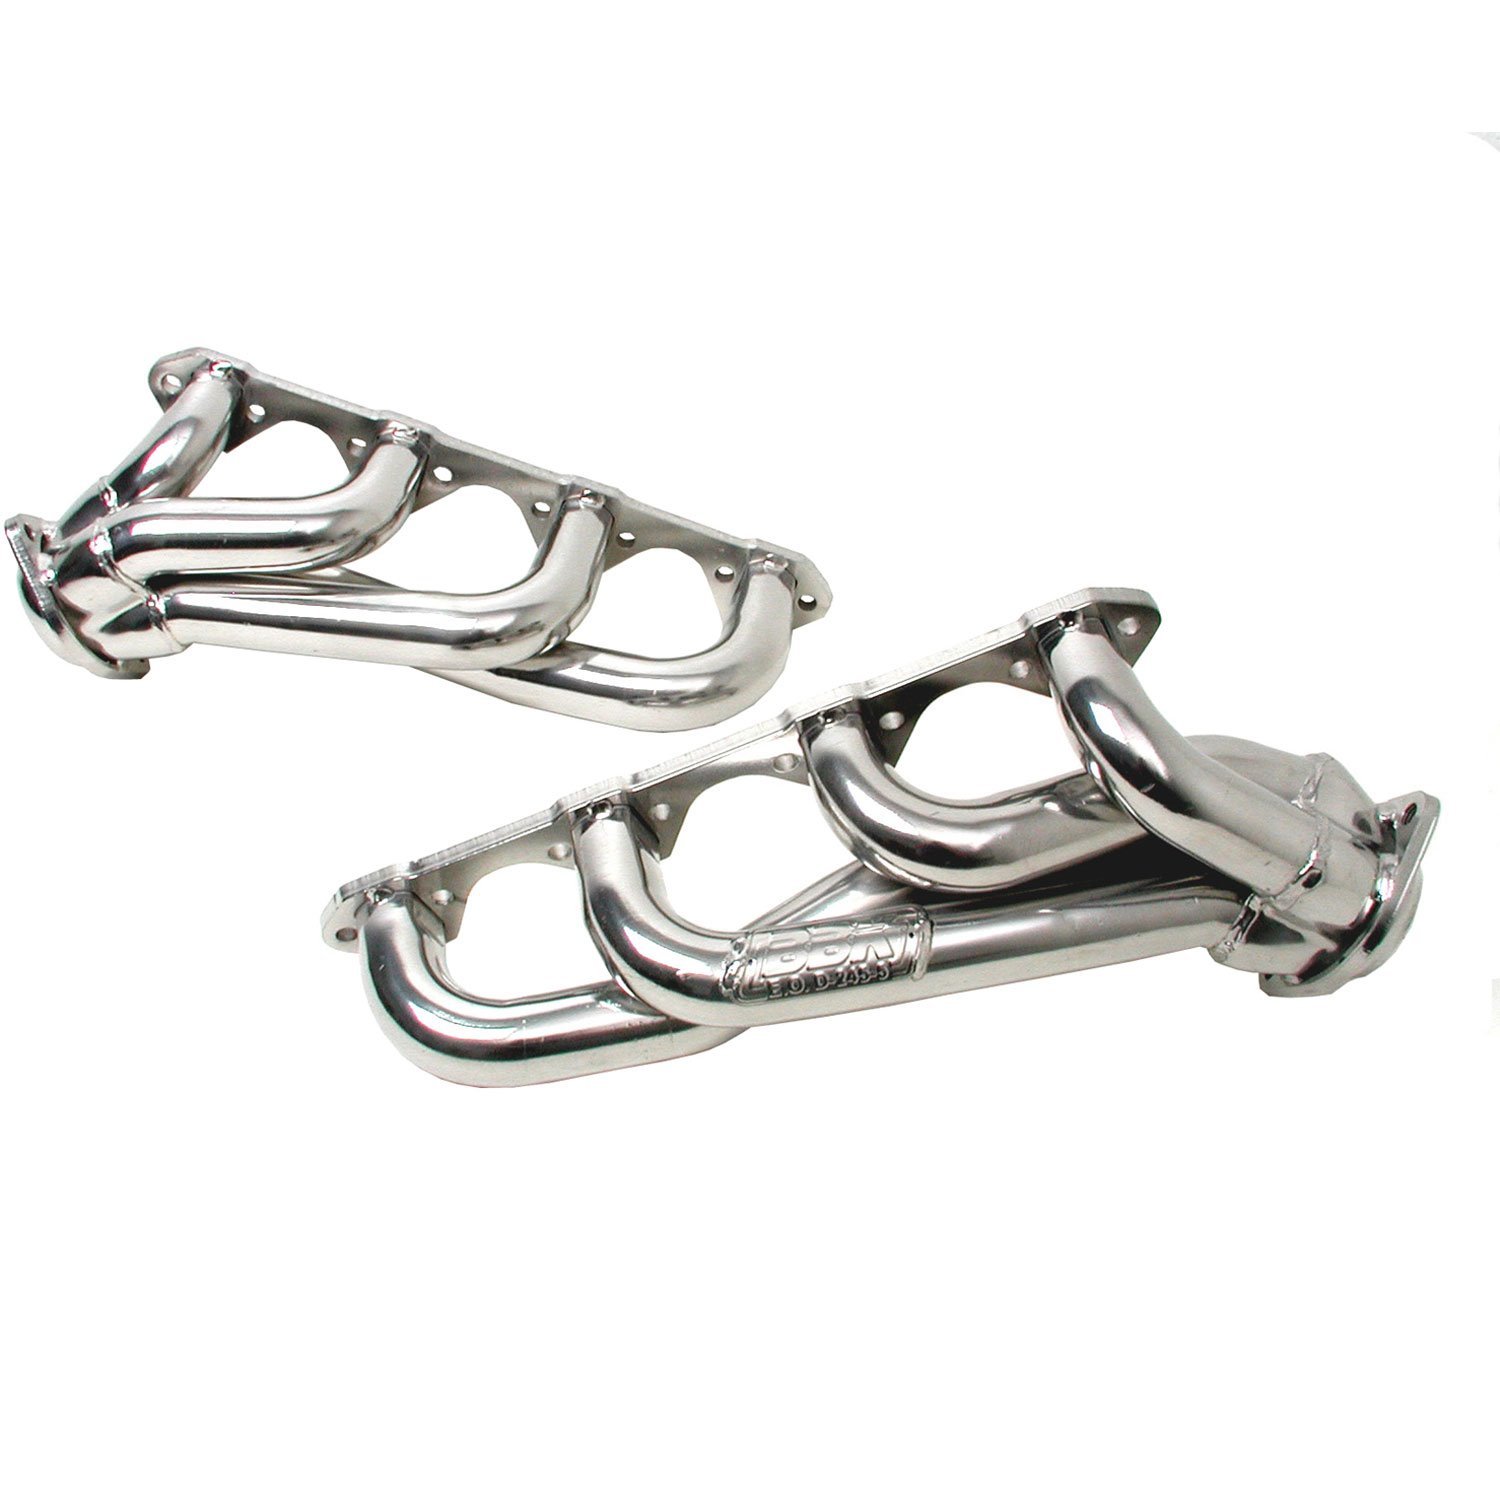 Unequal Length Shorty Headers 1979-1993 Ford Mustang 5.8L/351W Swap